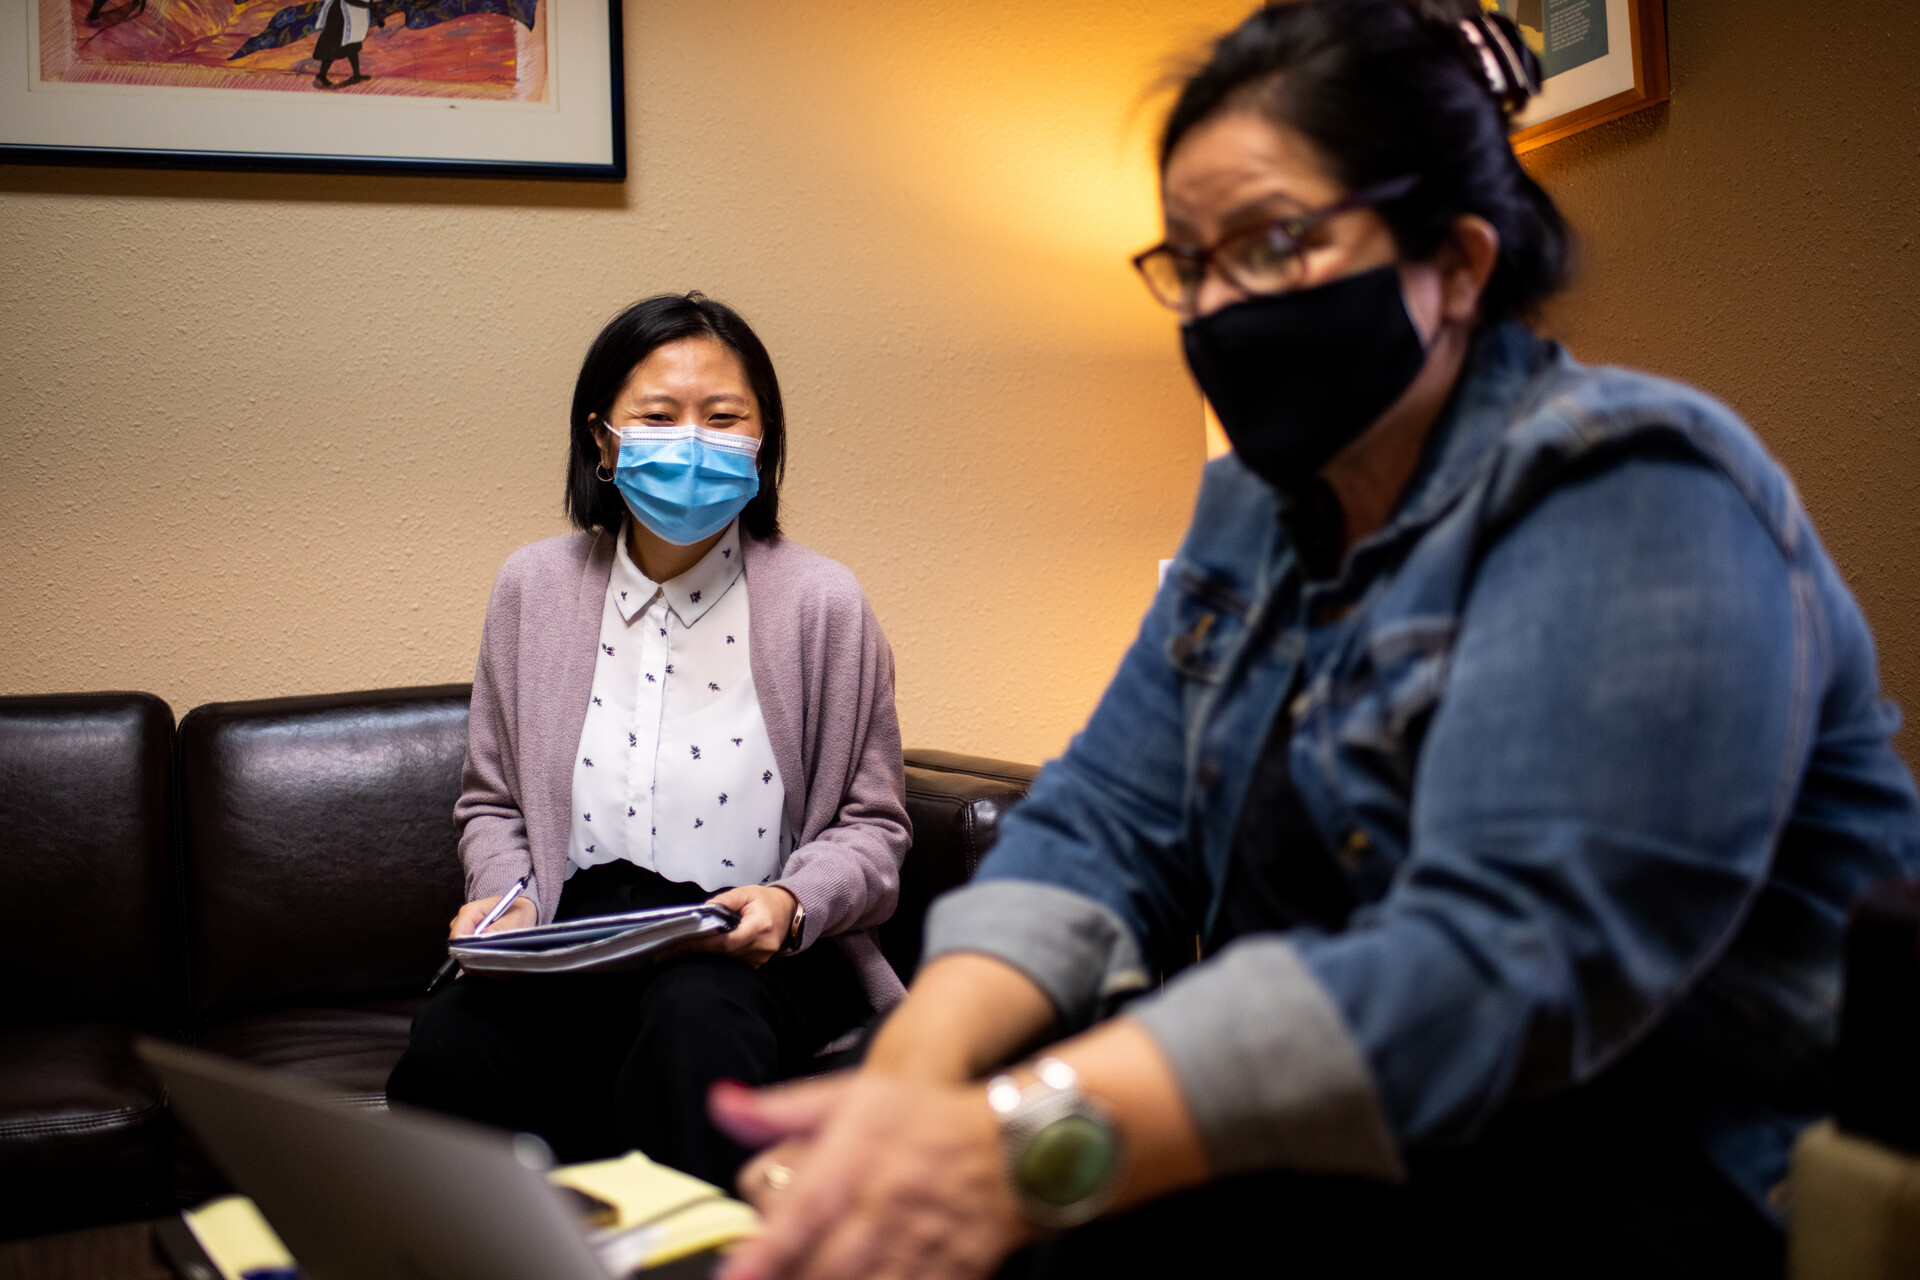 Two people with face masks sit in an office.